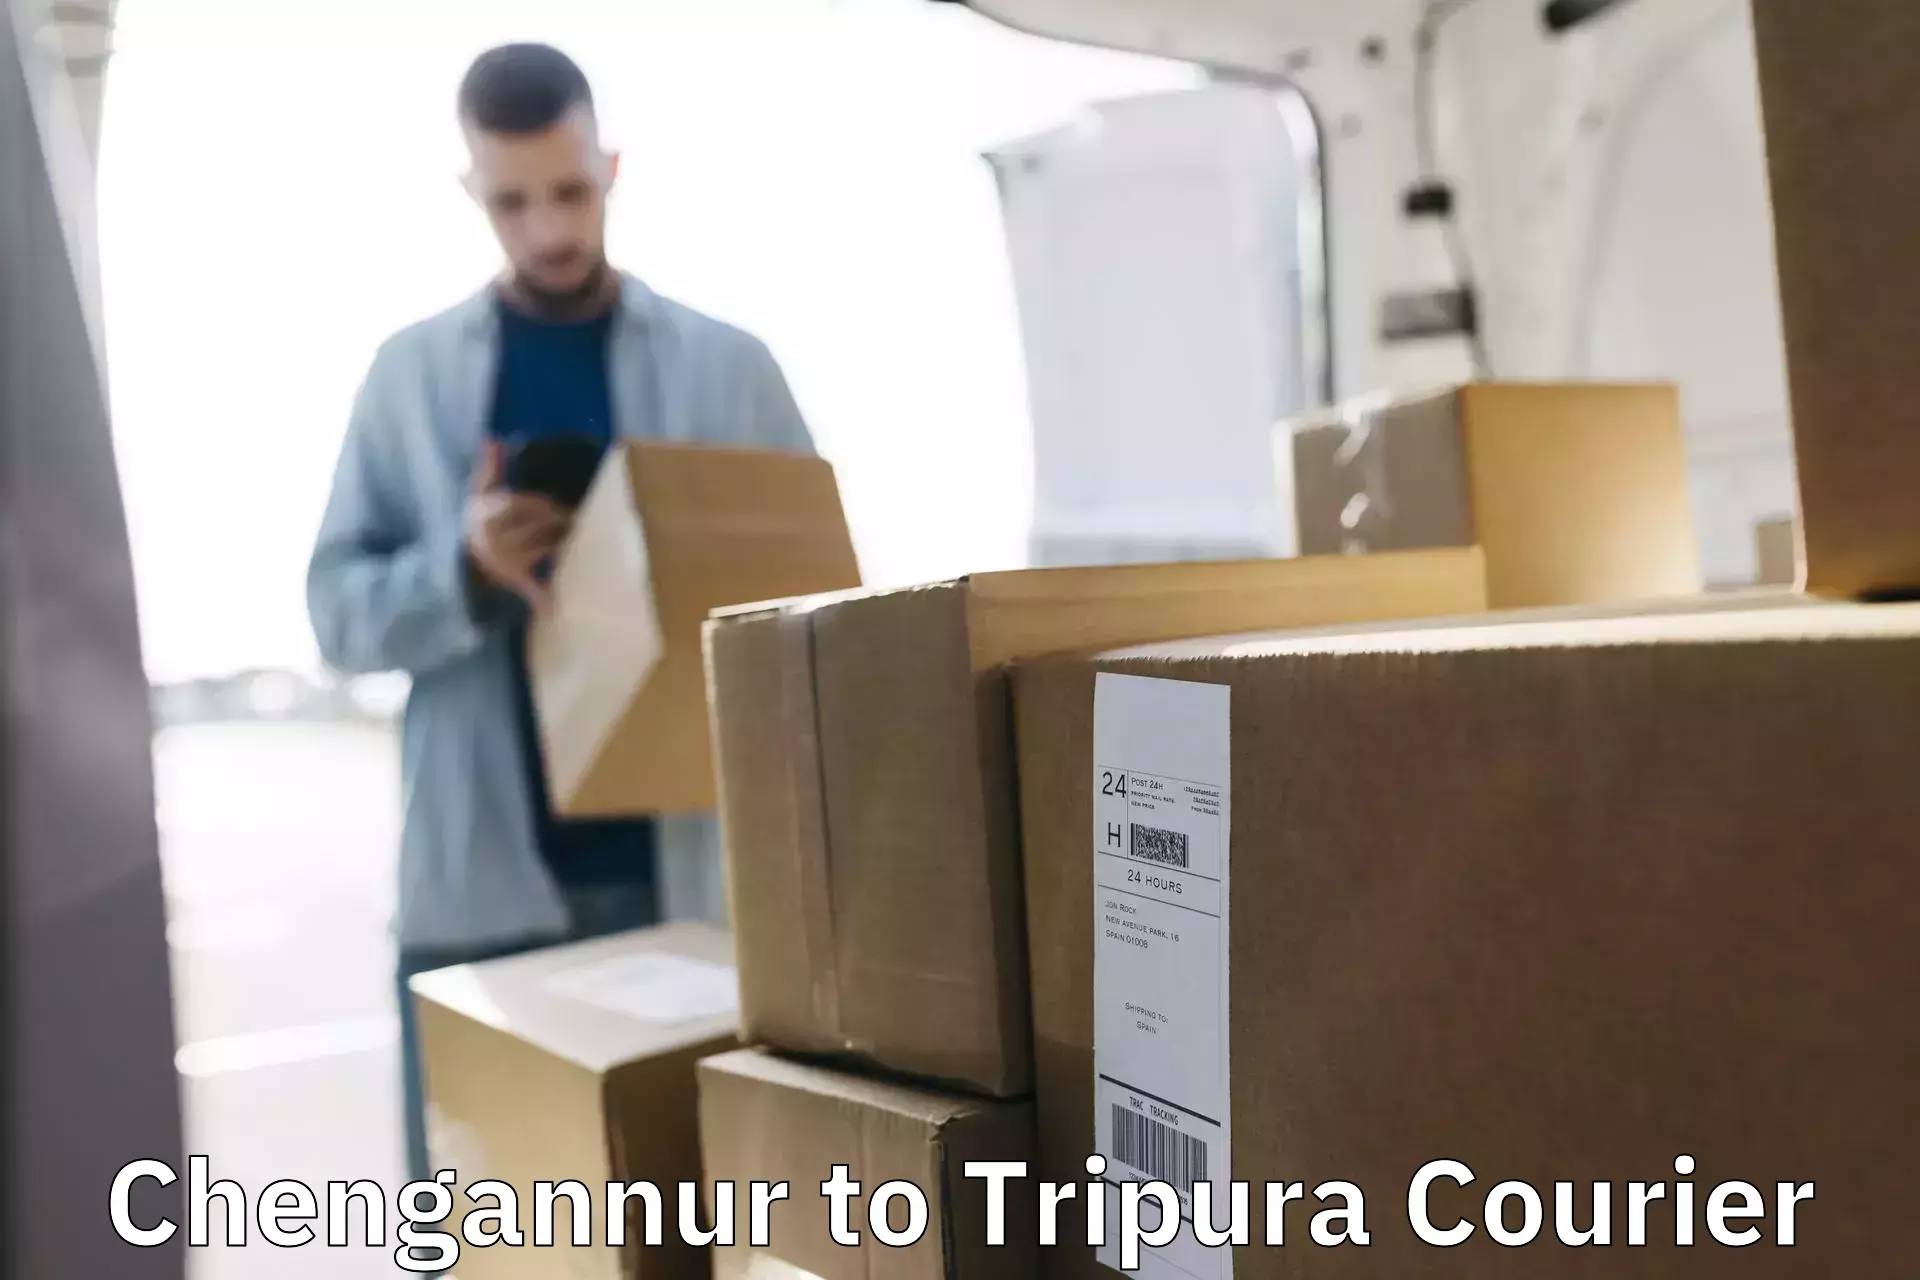 Reliable parcel services in Chengannur to Udaipur Tripura